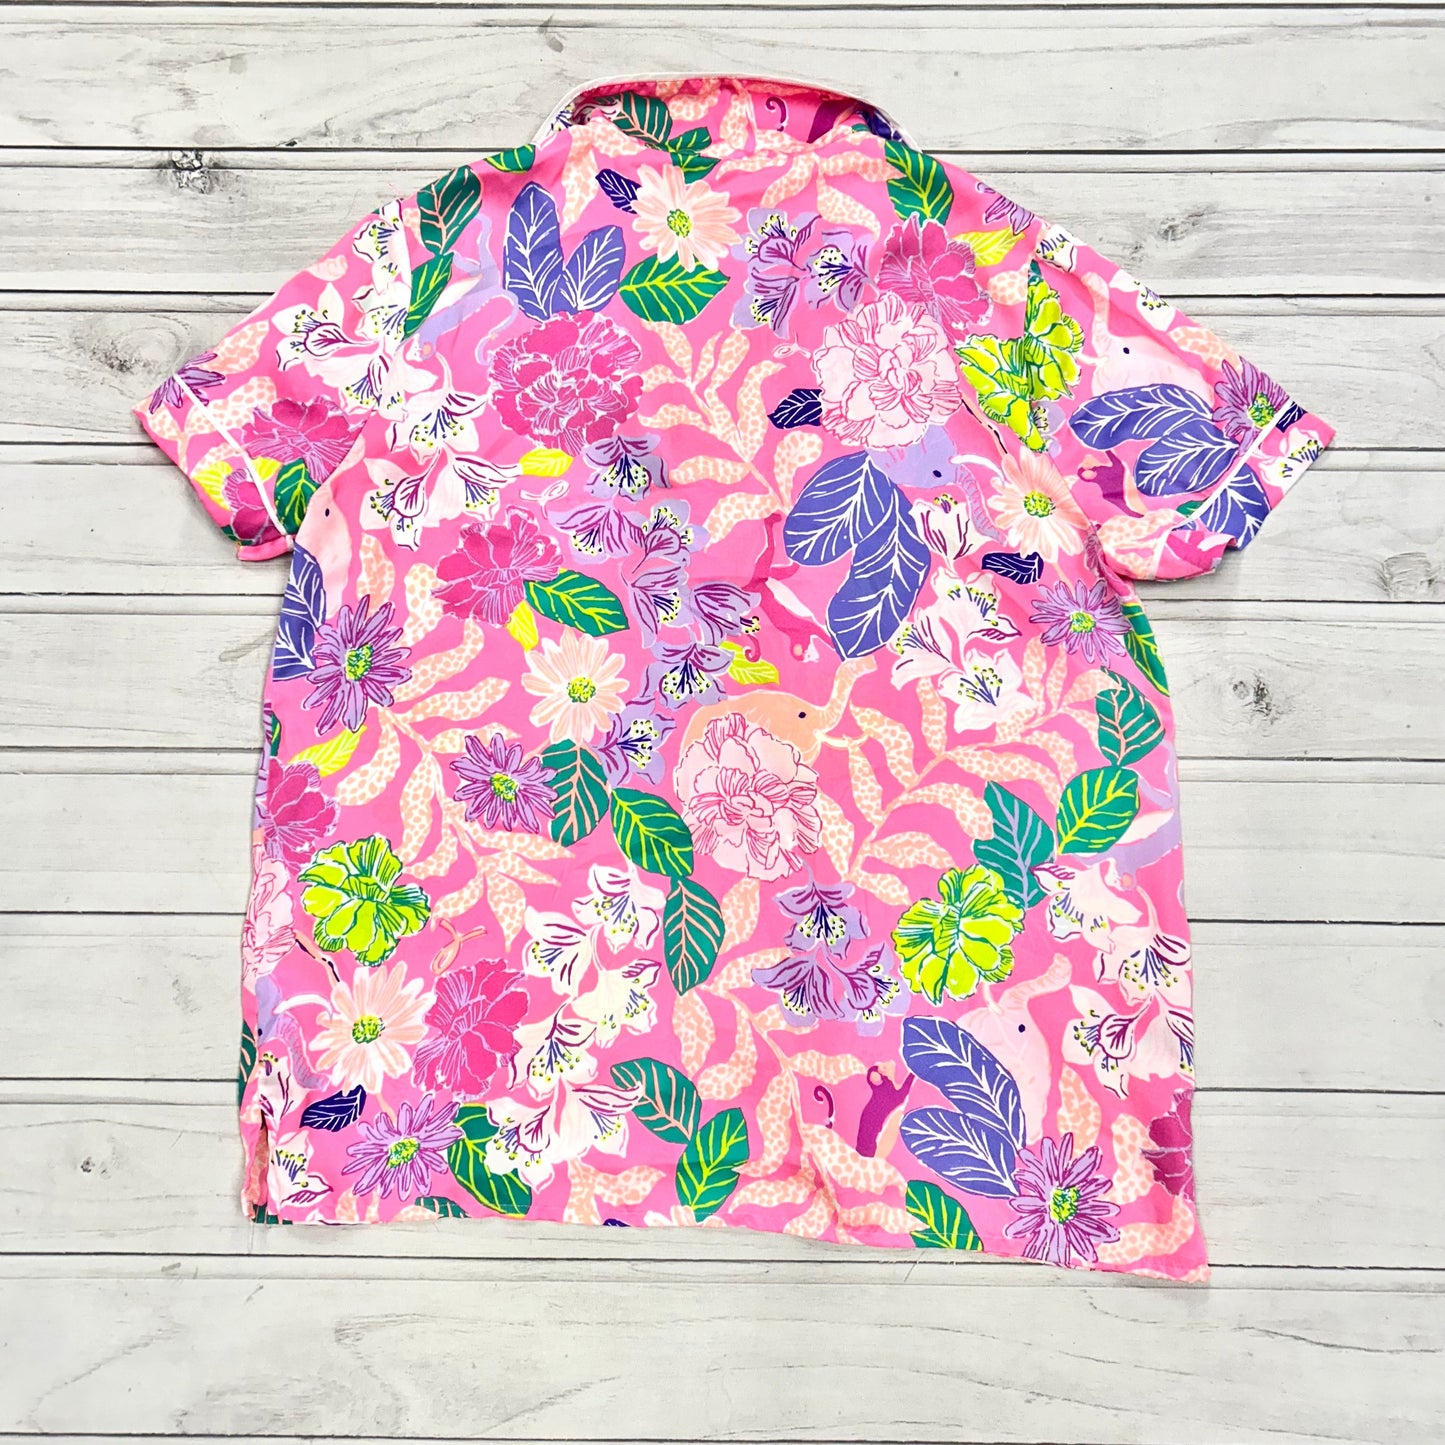 Top Short Sleeve Designer By Lilly Pulitzer  Size: M